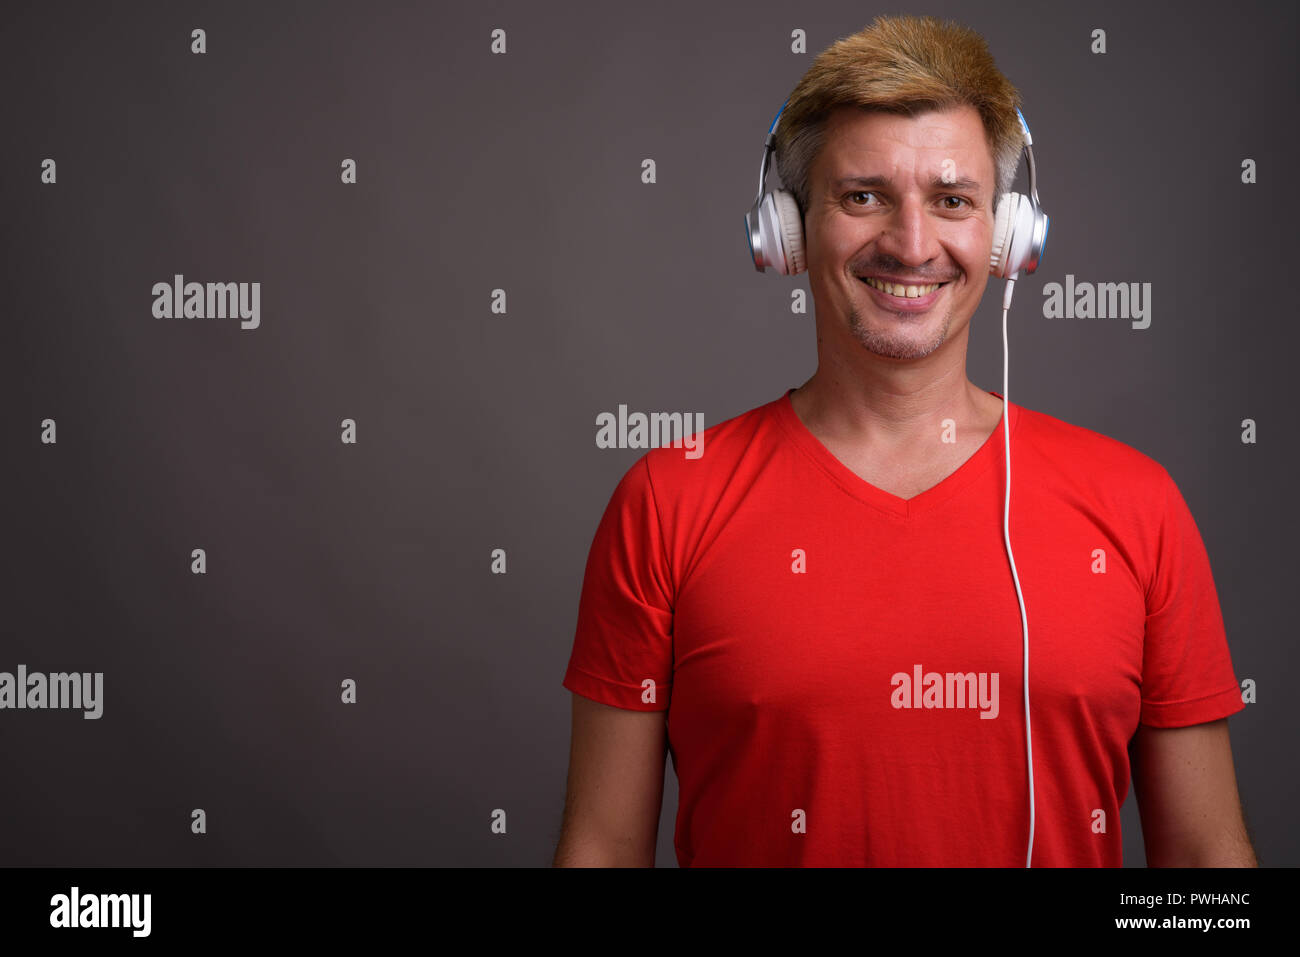 Man with blond hair listening to music against gray background Stock Photo